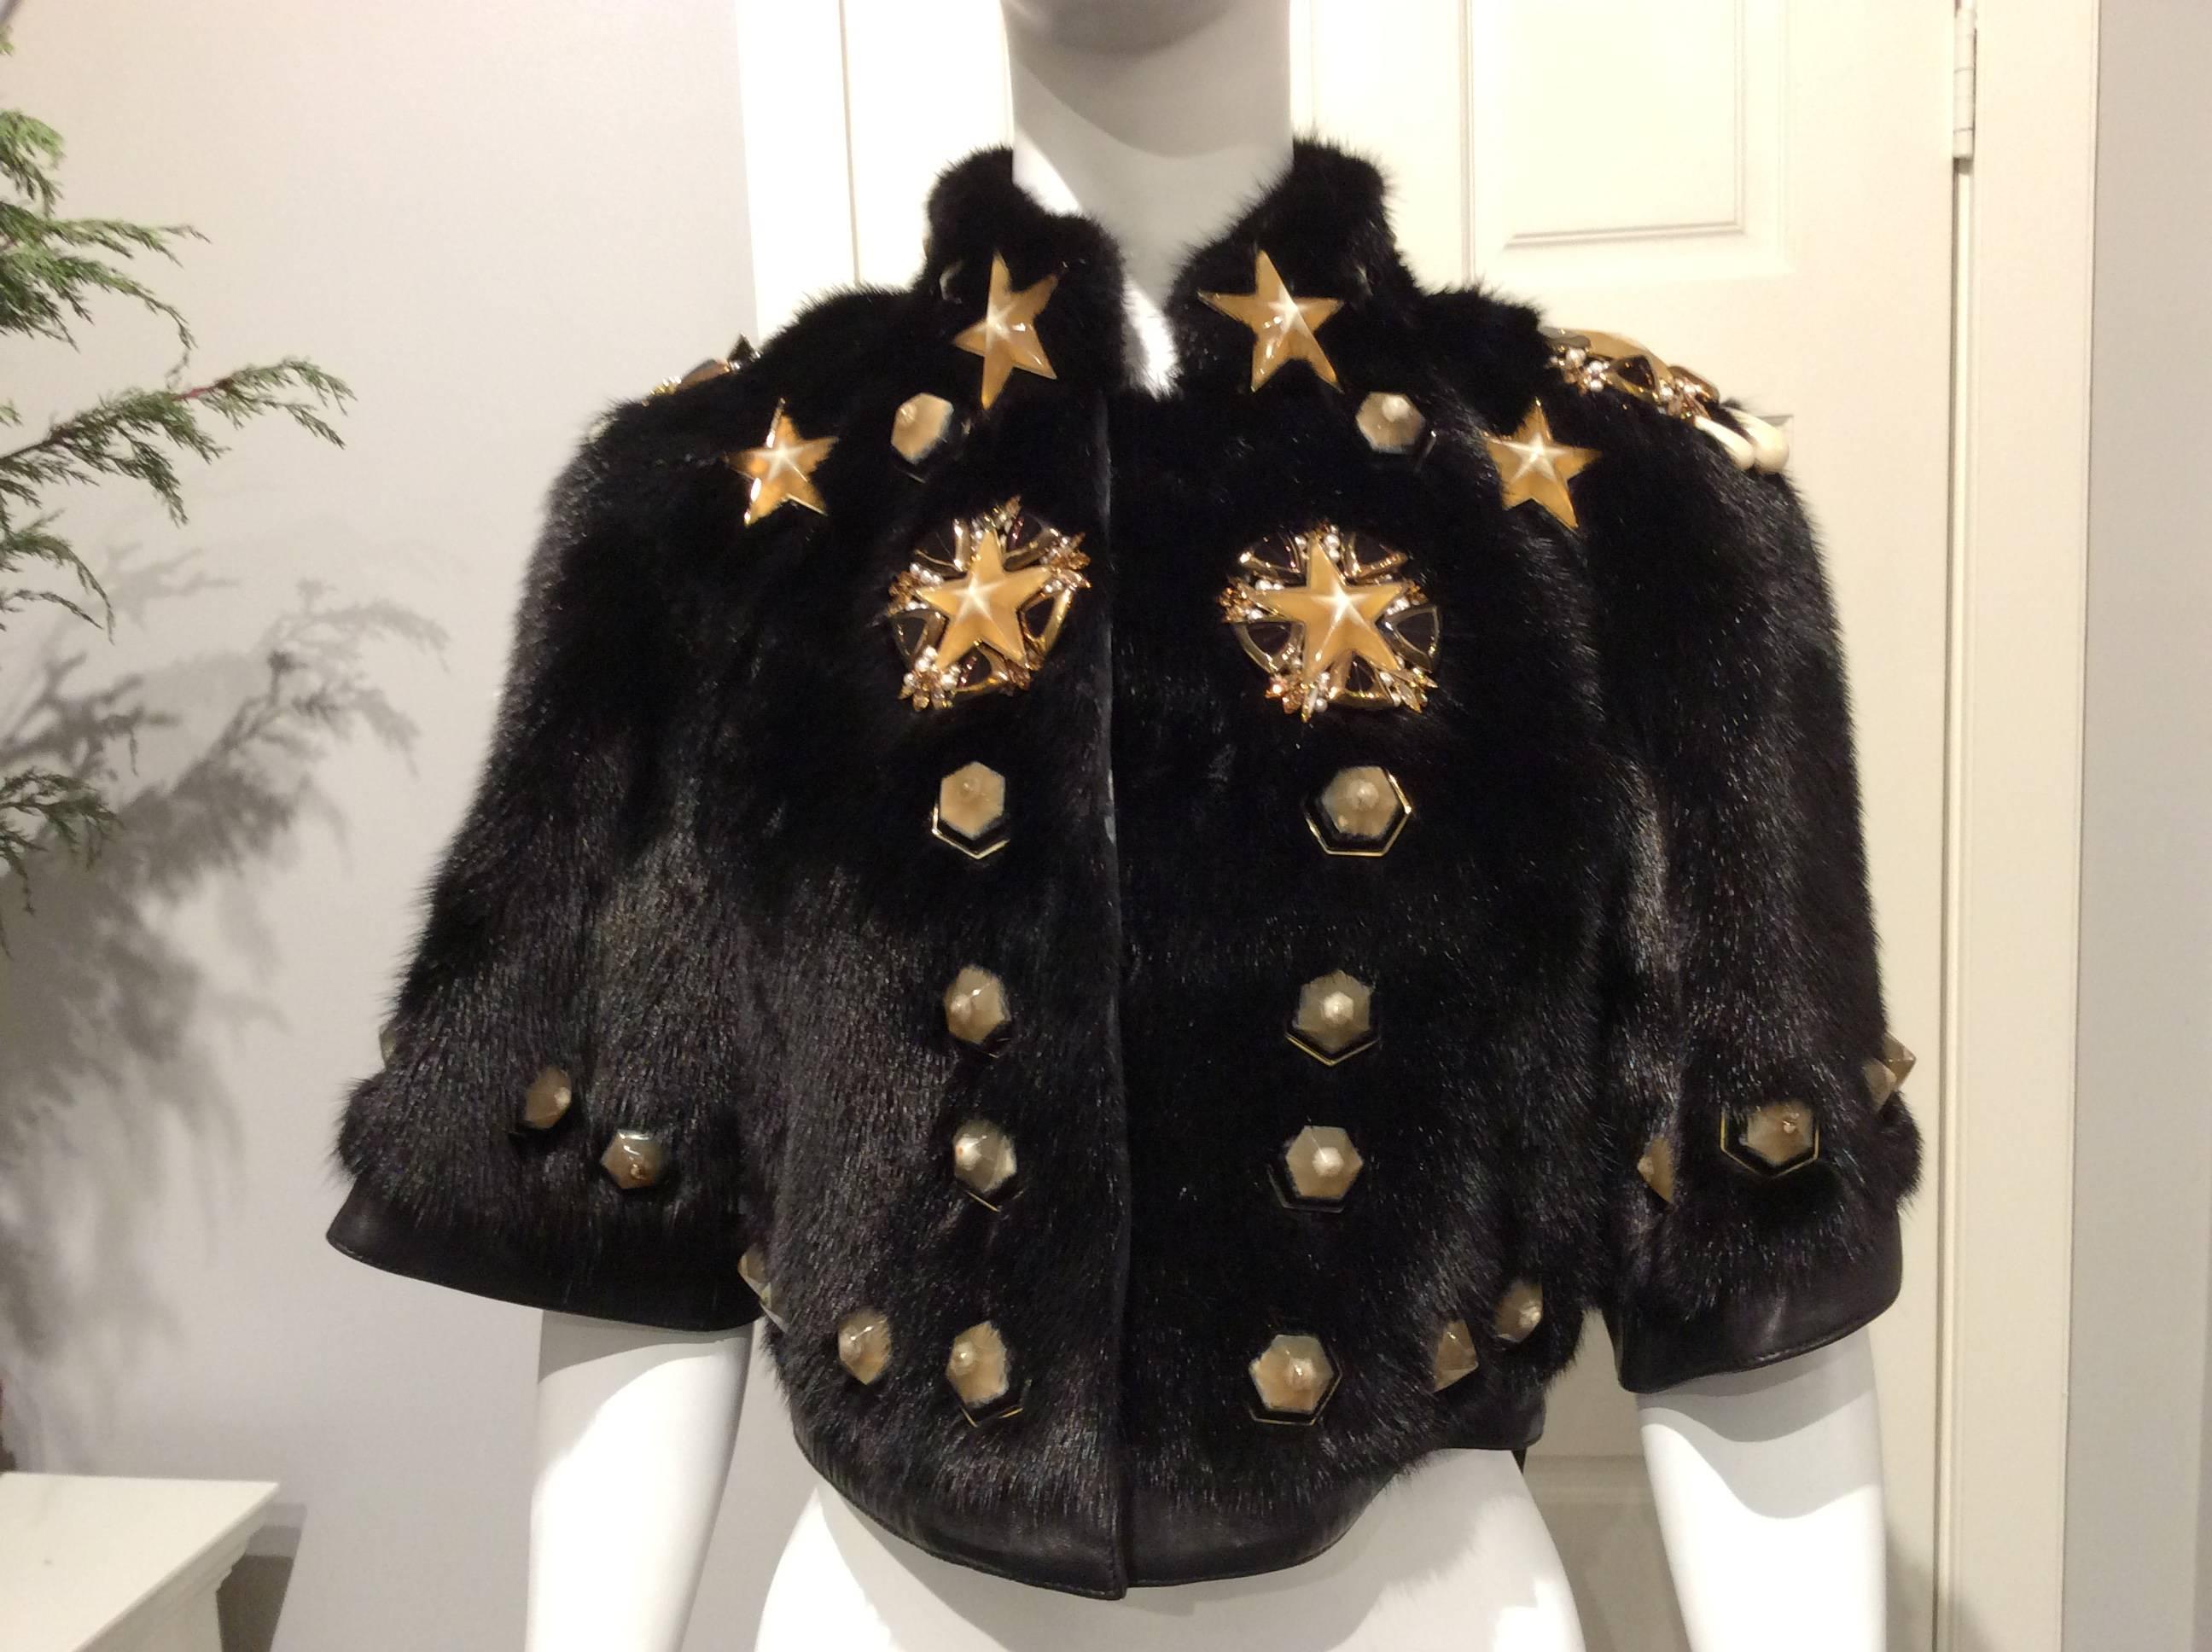 Stunning black mink tailcoat with gold framed honey colored stars embellishments. In addition it features pearls, beads, rhinestones and stone like studs in shades that go from amber and ivory to black.
The body and the elbow length kimono sleeves